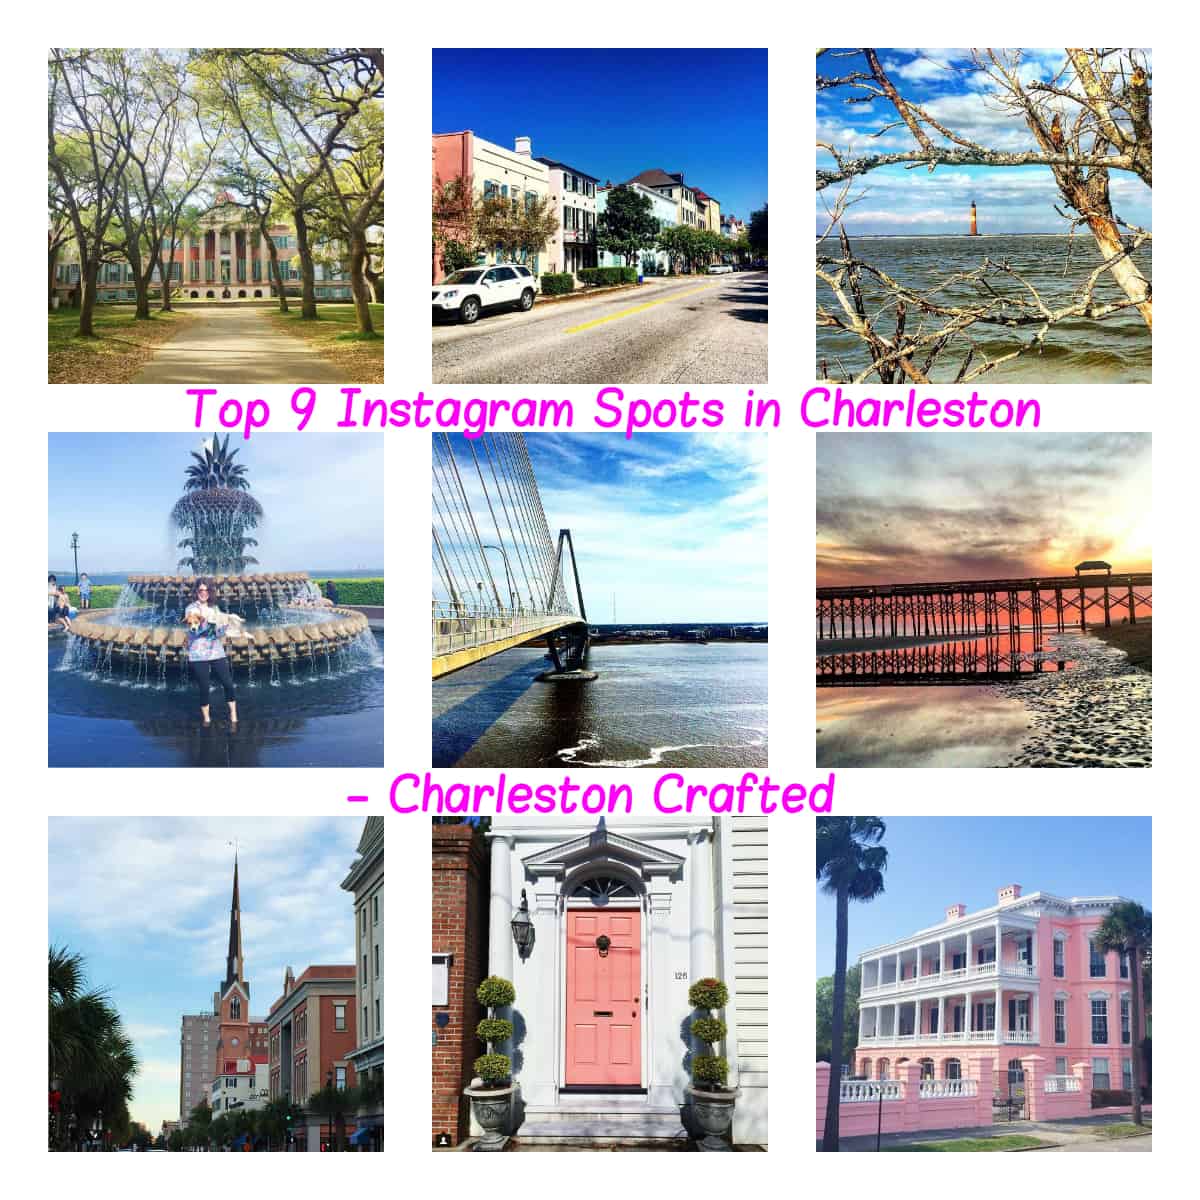 The Top 9 Instagram Spots in Charleston • Charleston Crafted